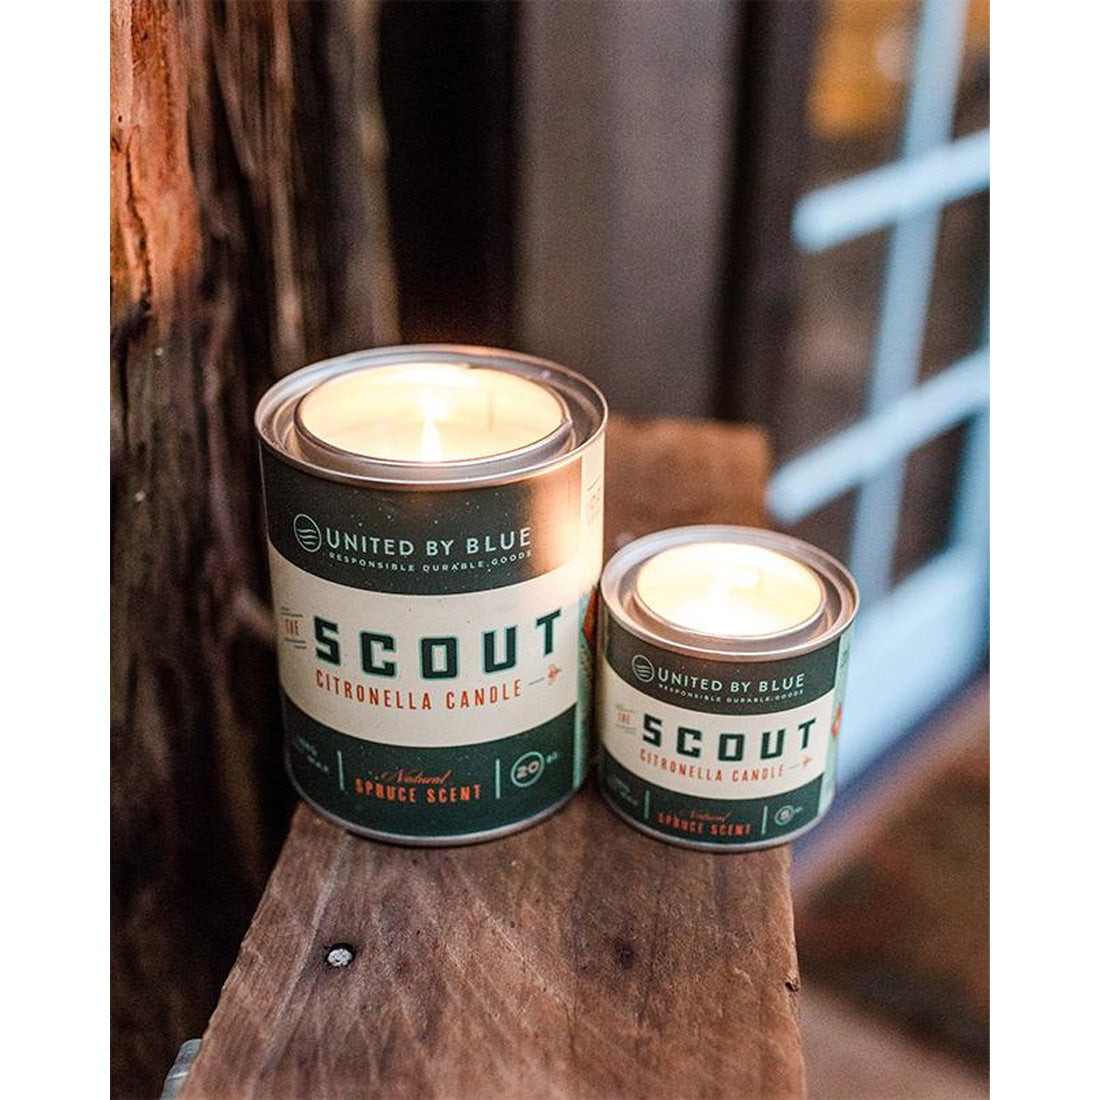 United By Blue Scout Citronella Candle 20oz